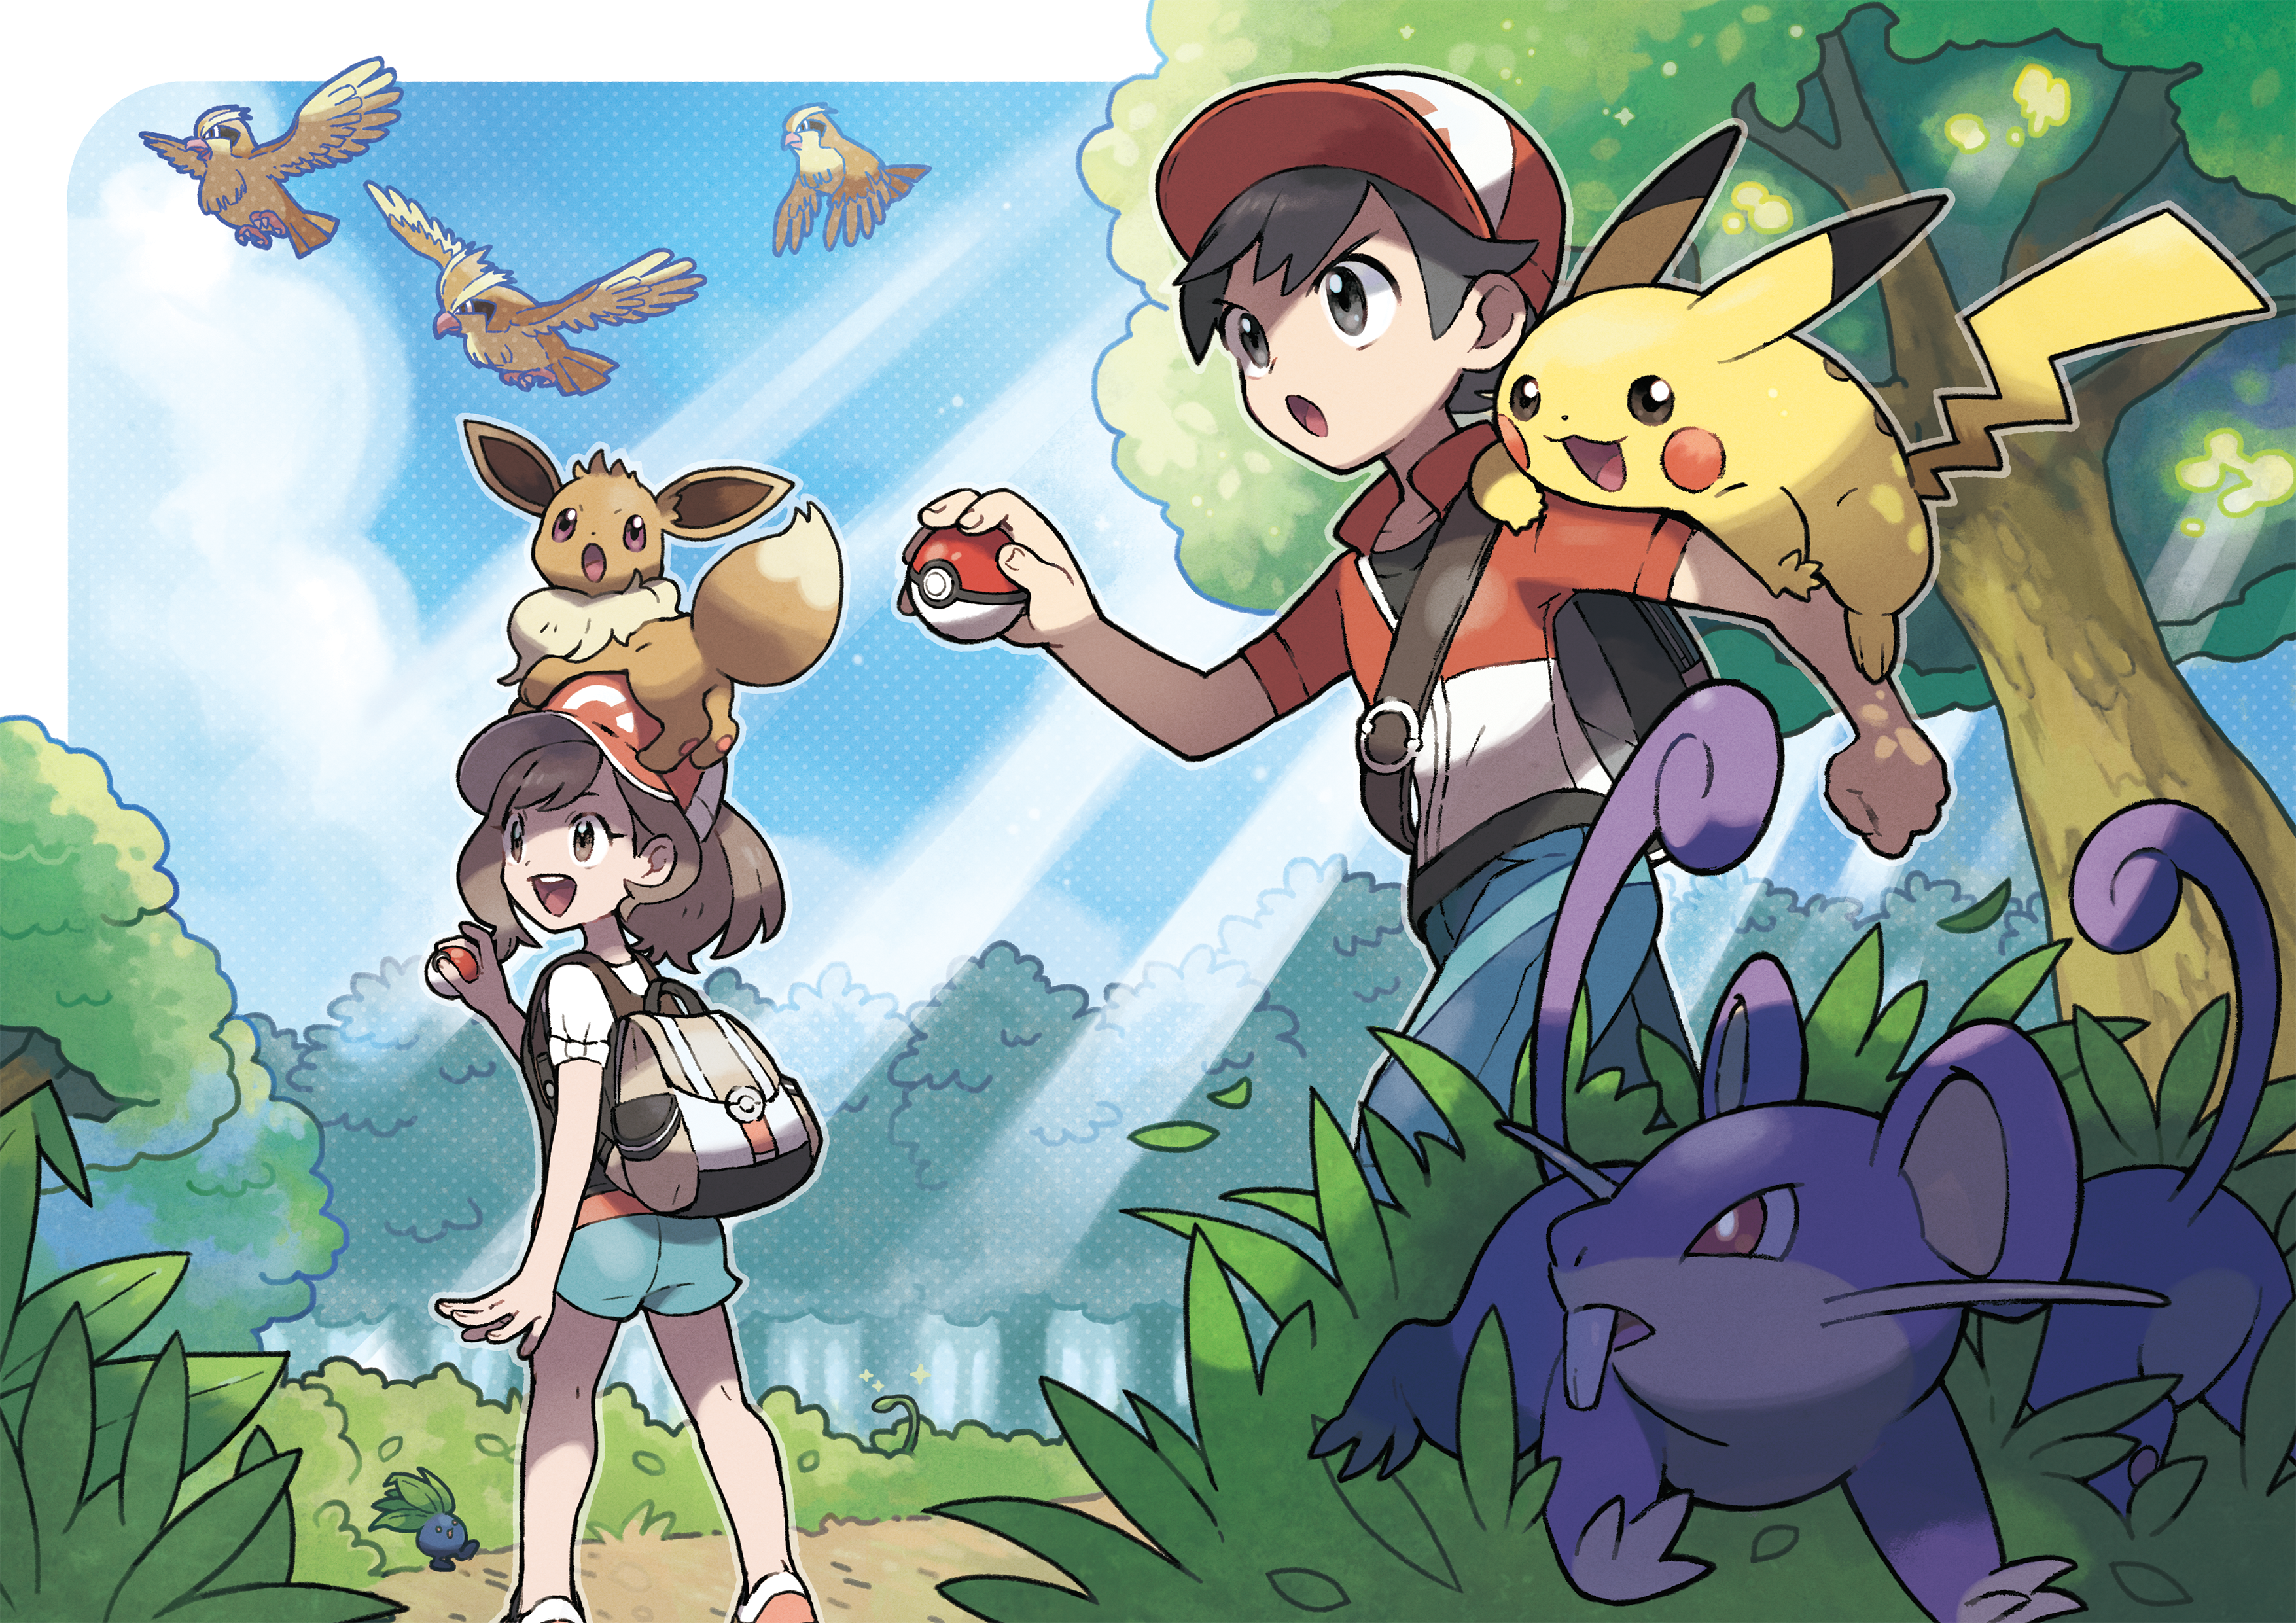 Video Game Pokémon: Let's Go Pikachu and Let's Go Eevee HD Wallpaper